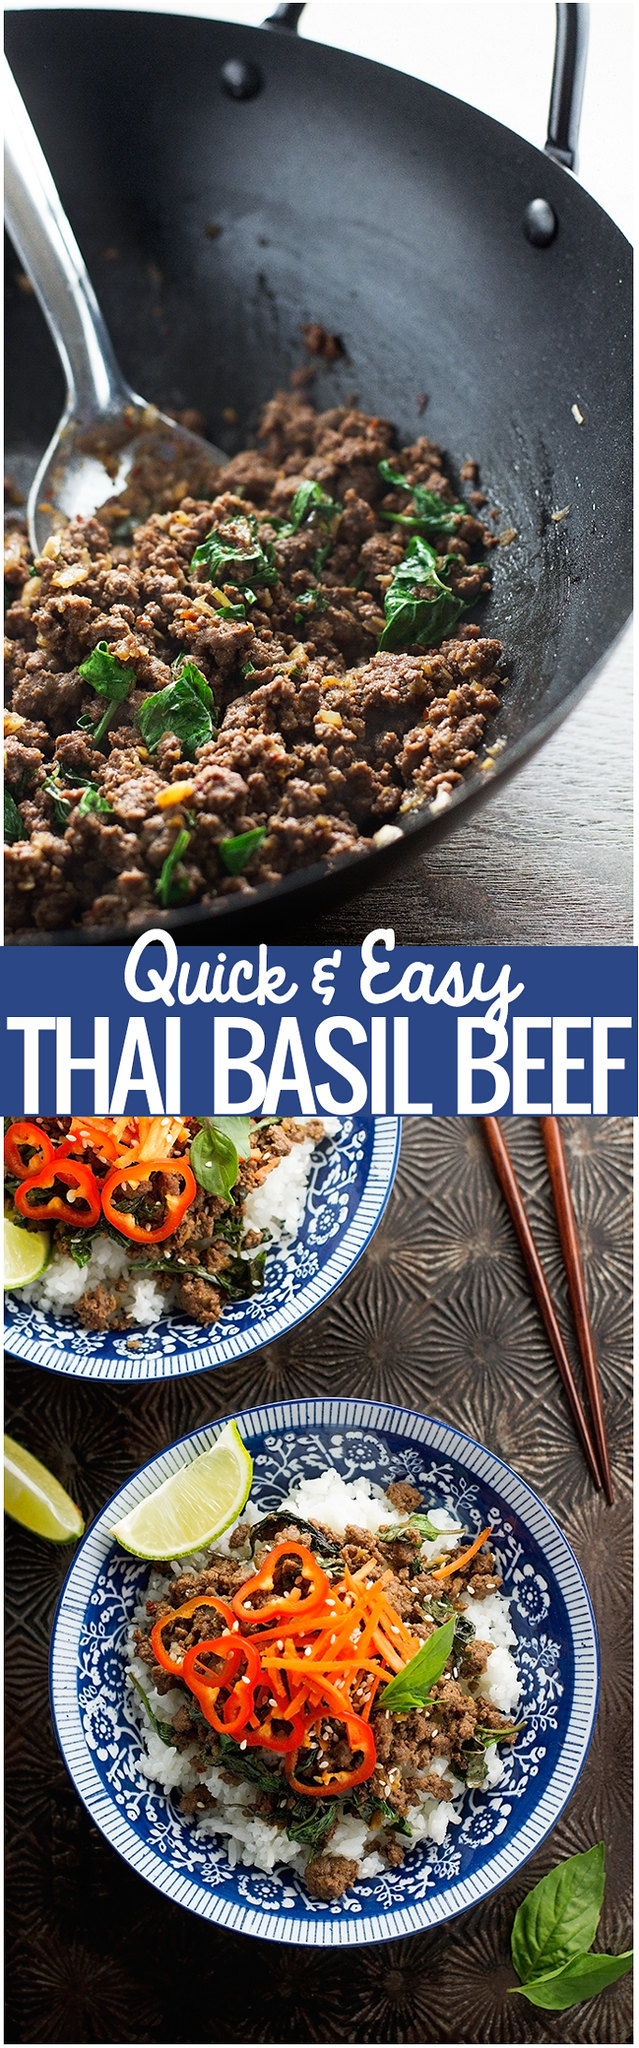 Thai Basil Beef - Quick and easy to make and ready in just 20 minutes. It'll be a hit with adults and kids alike! #thaifood #basilbeef #thaibasilbeef | Littlespicejar.com